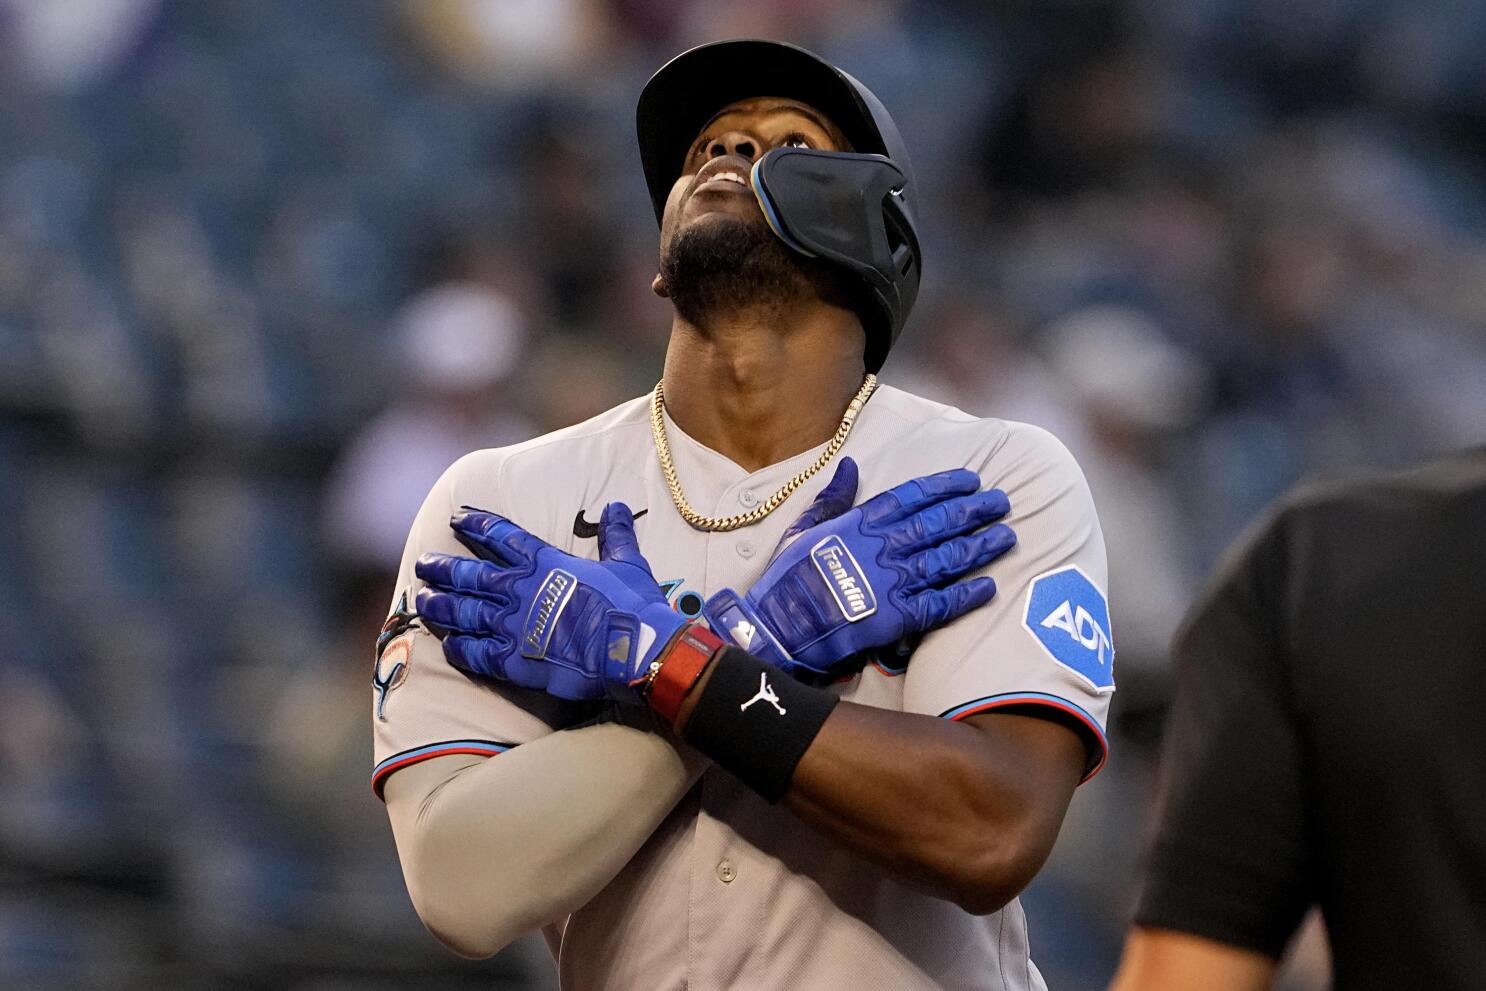 MIAMI, FL - APRIL 14: Miami Marlins left fielder Jorge Soler (12) watches  an incoming pitch during the game between the Arizona Diamondbacks and the  Miami Marlins on Friday, April 14, 2023